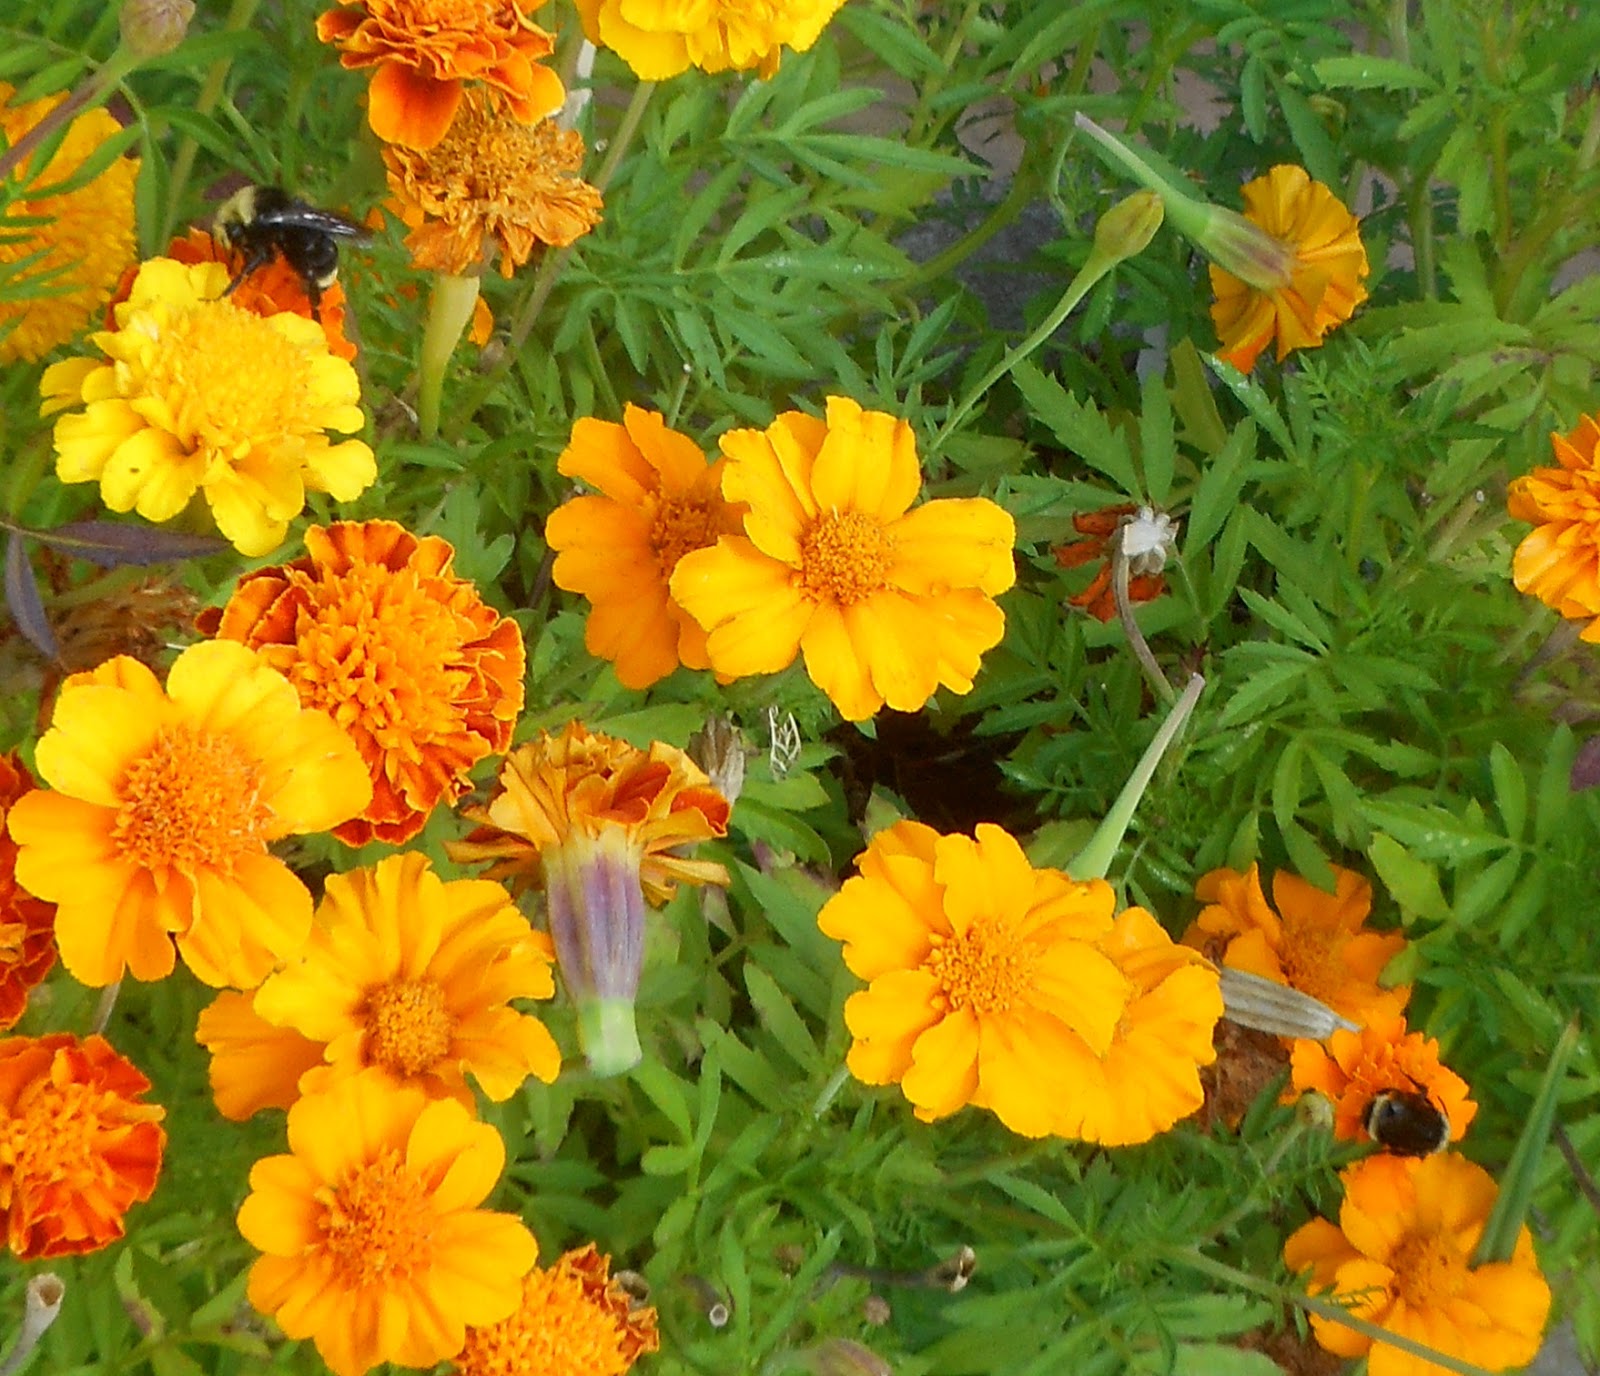 Bees on marigolds.